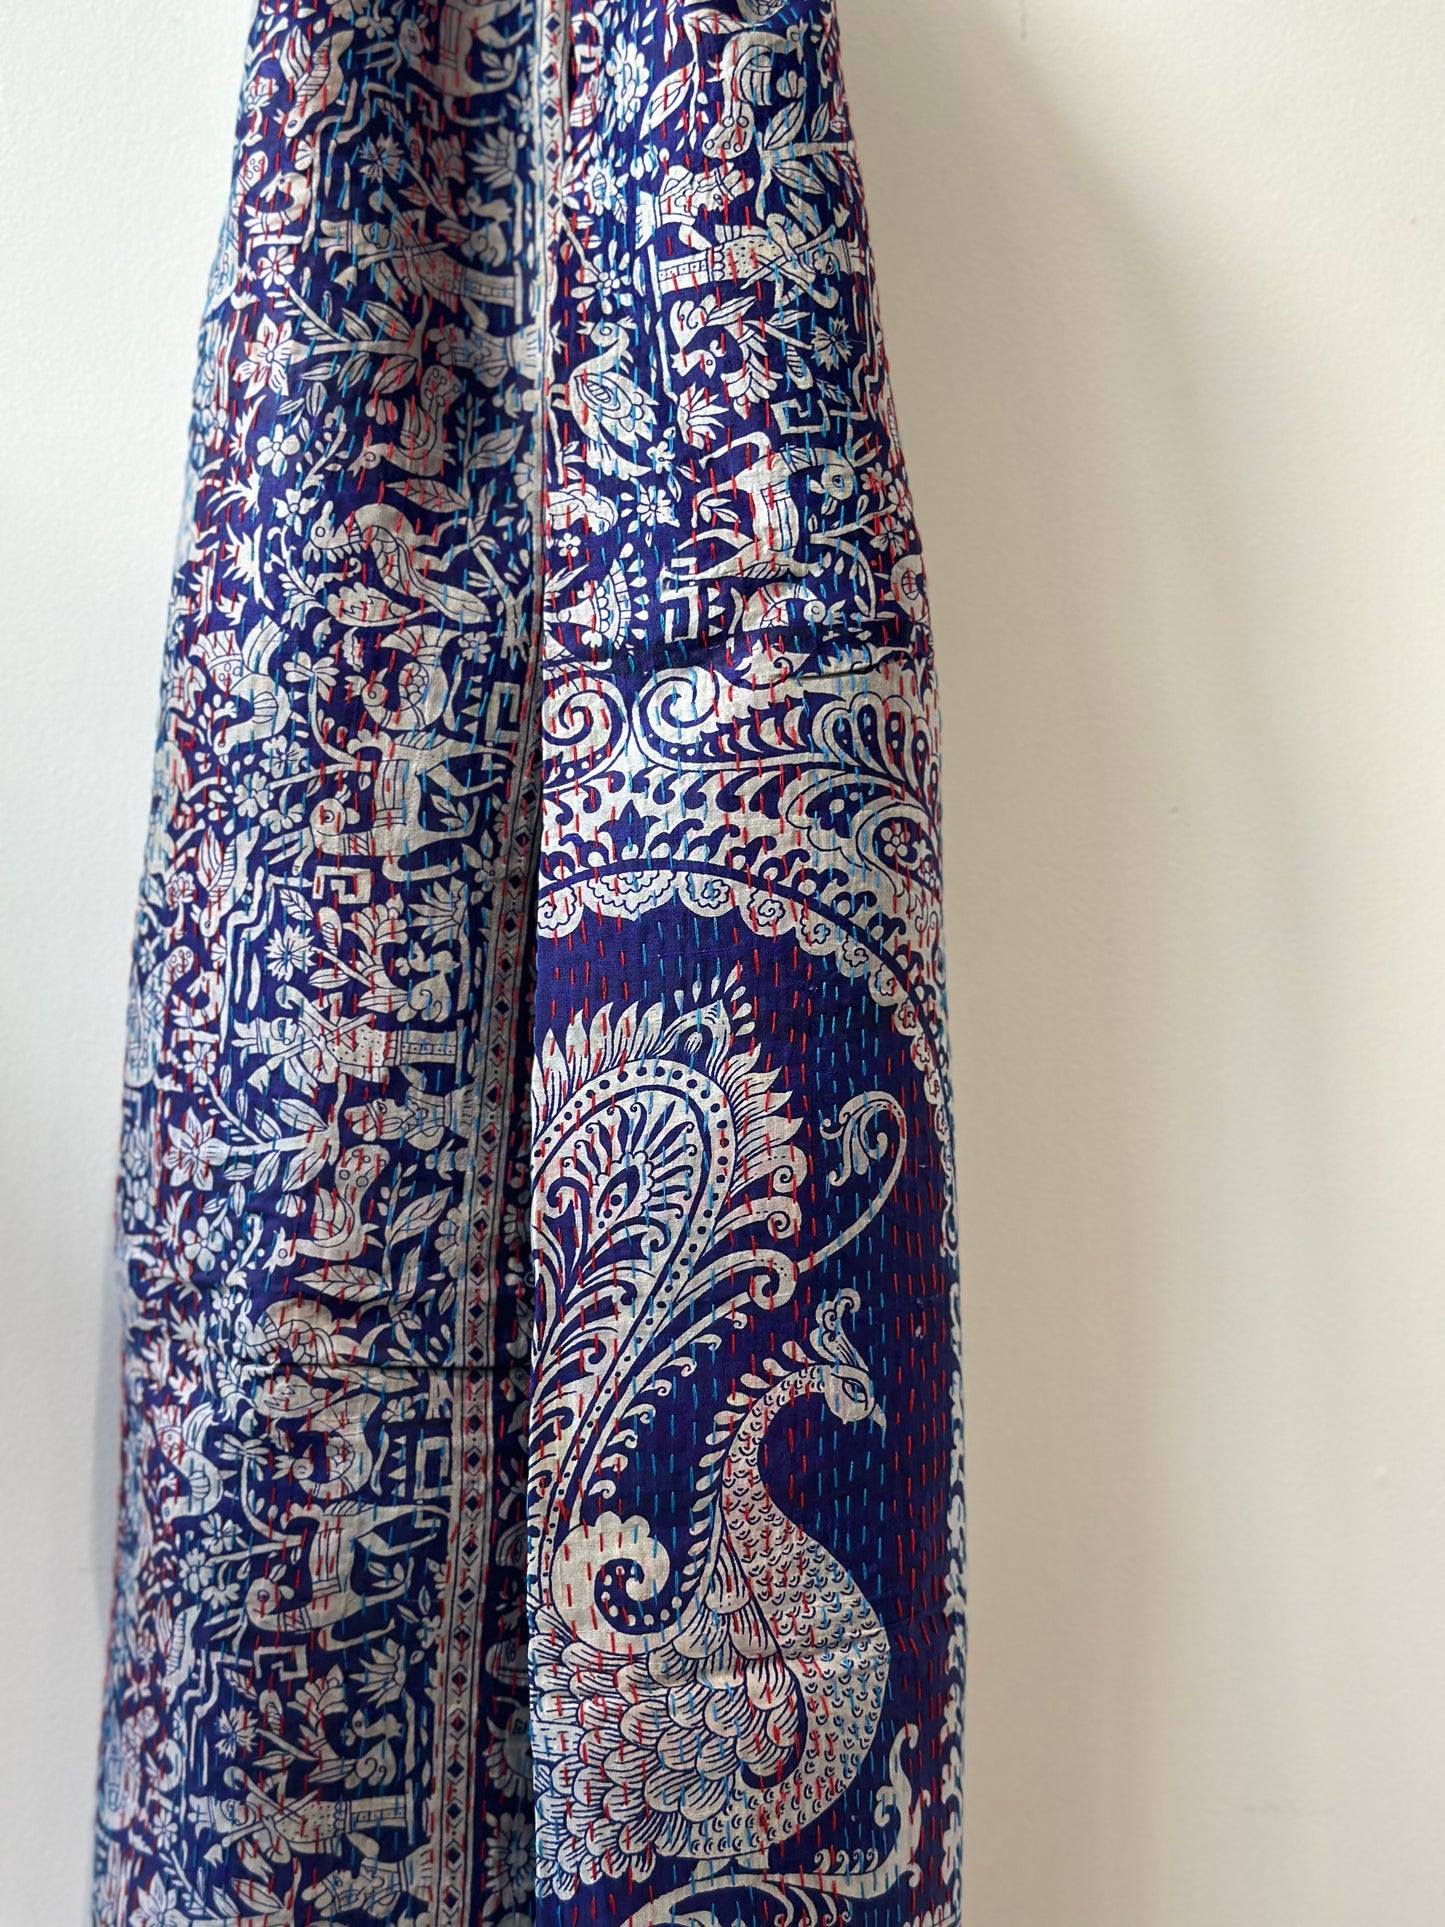 Kantha Patterned Scarf - Peacock